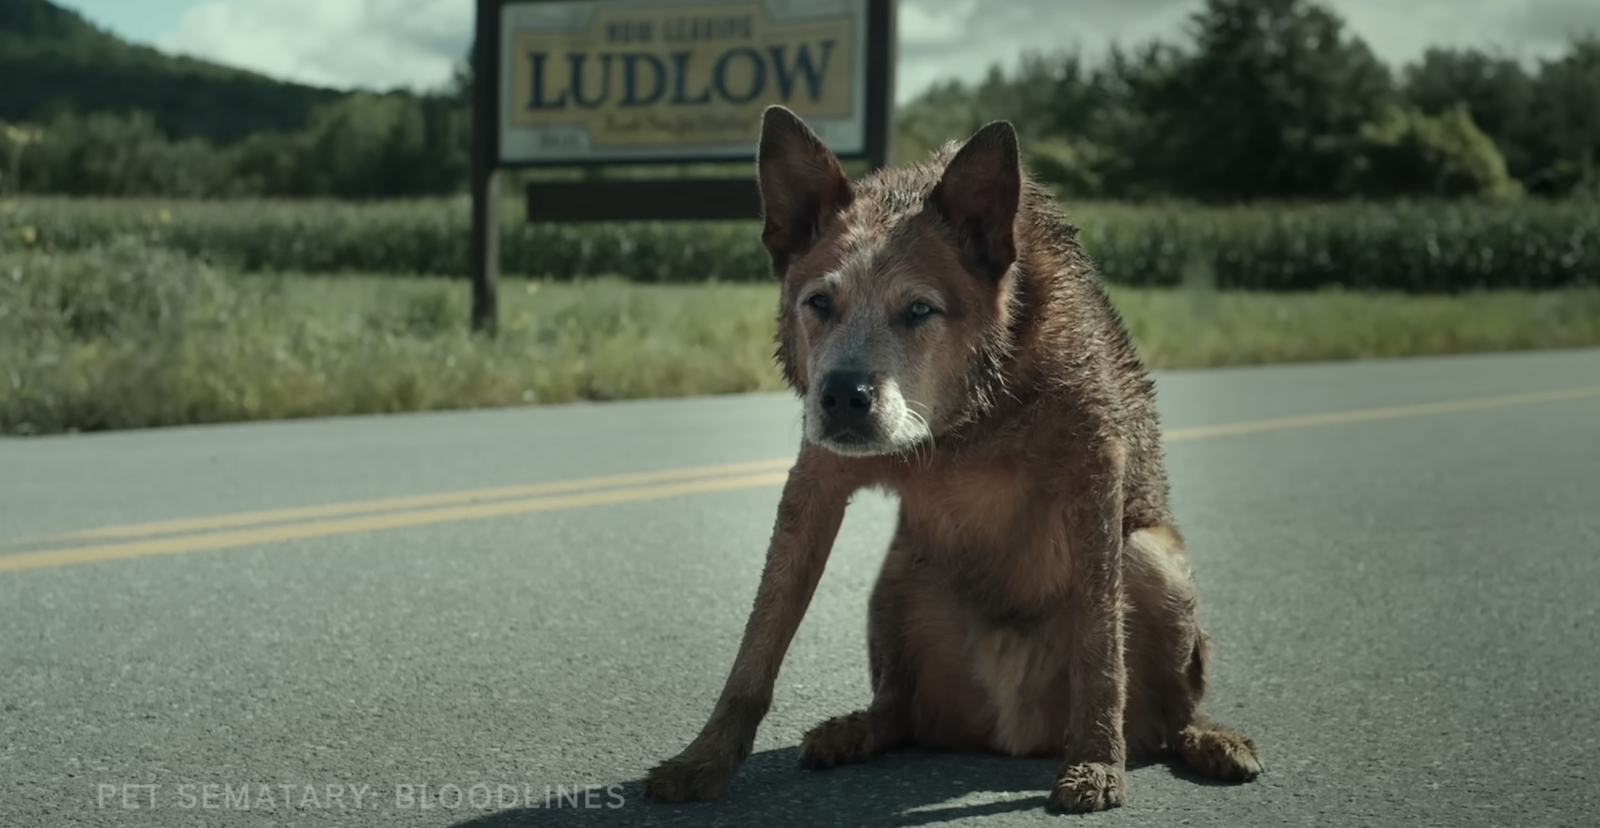 A super cute dog from the pet sematary:bloodlines trailer